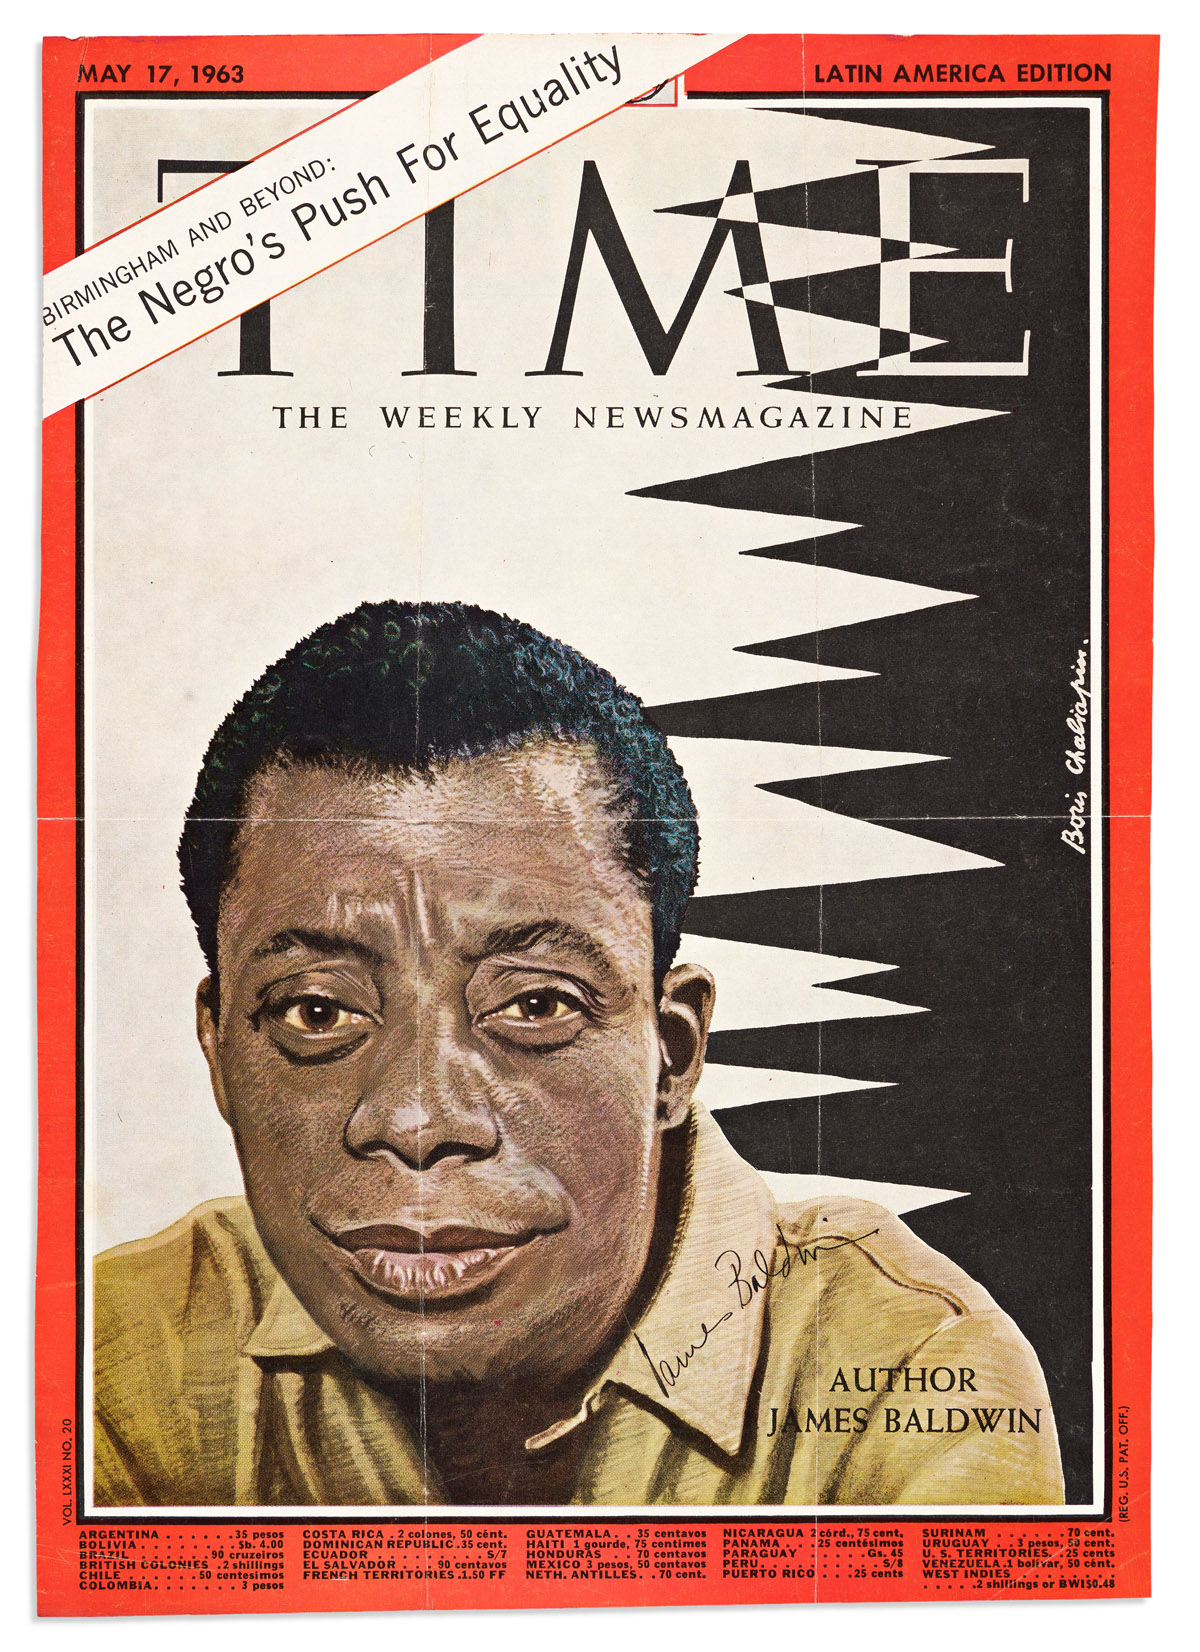 BALDWIN, JAMES. Time magazine cover Signed,